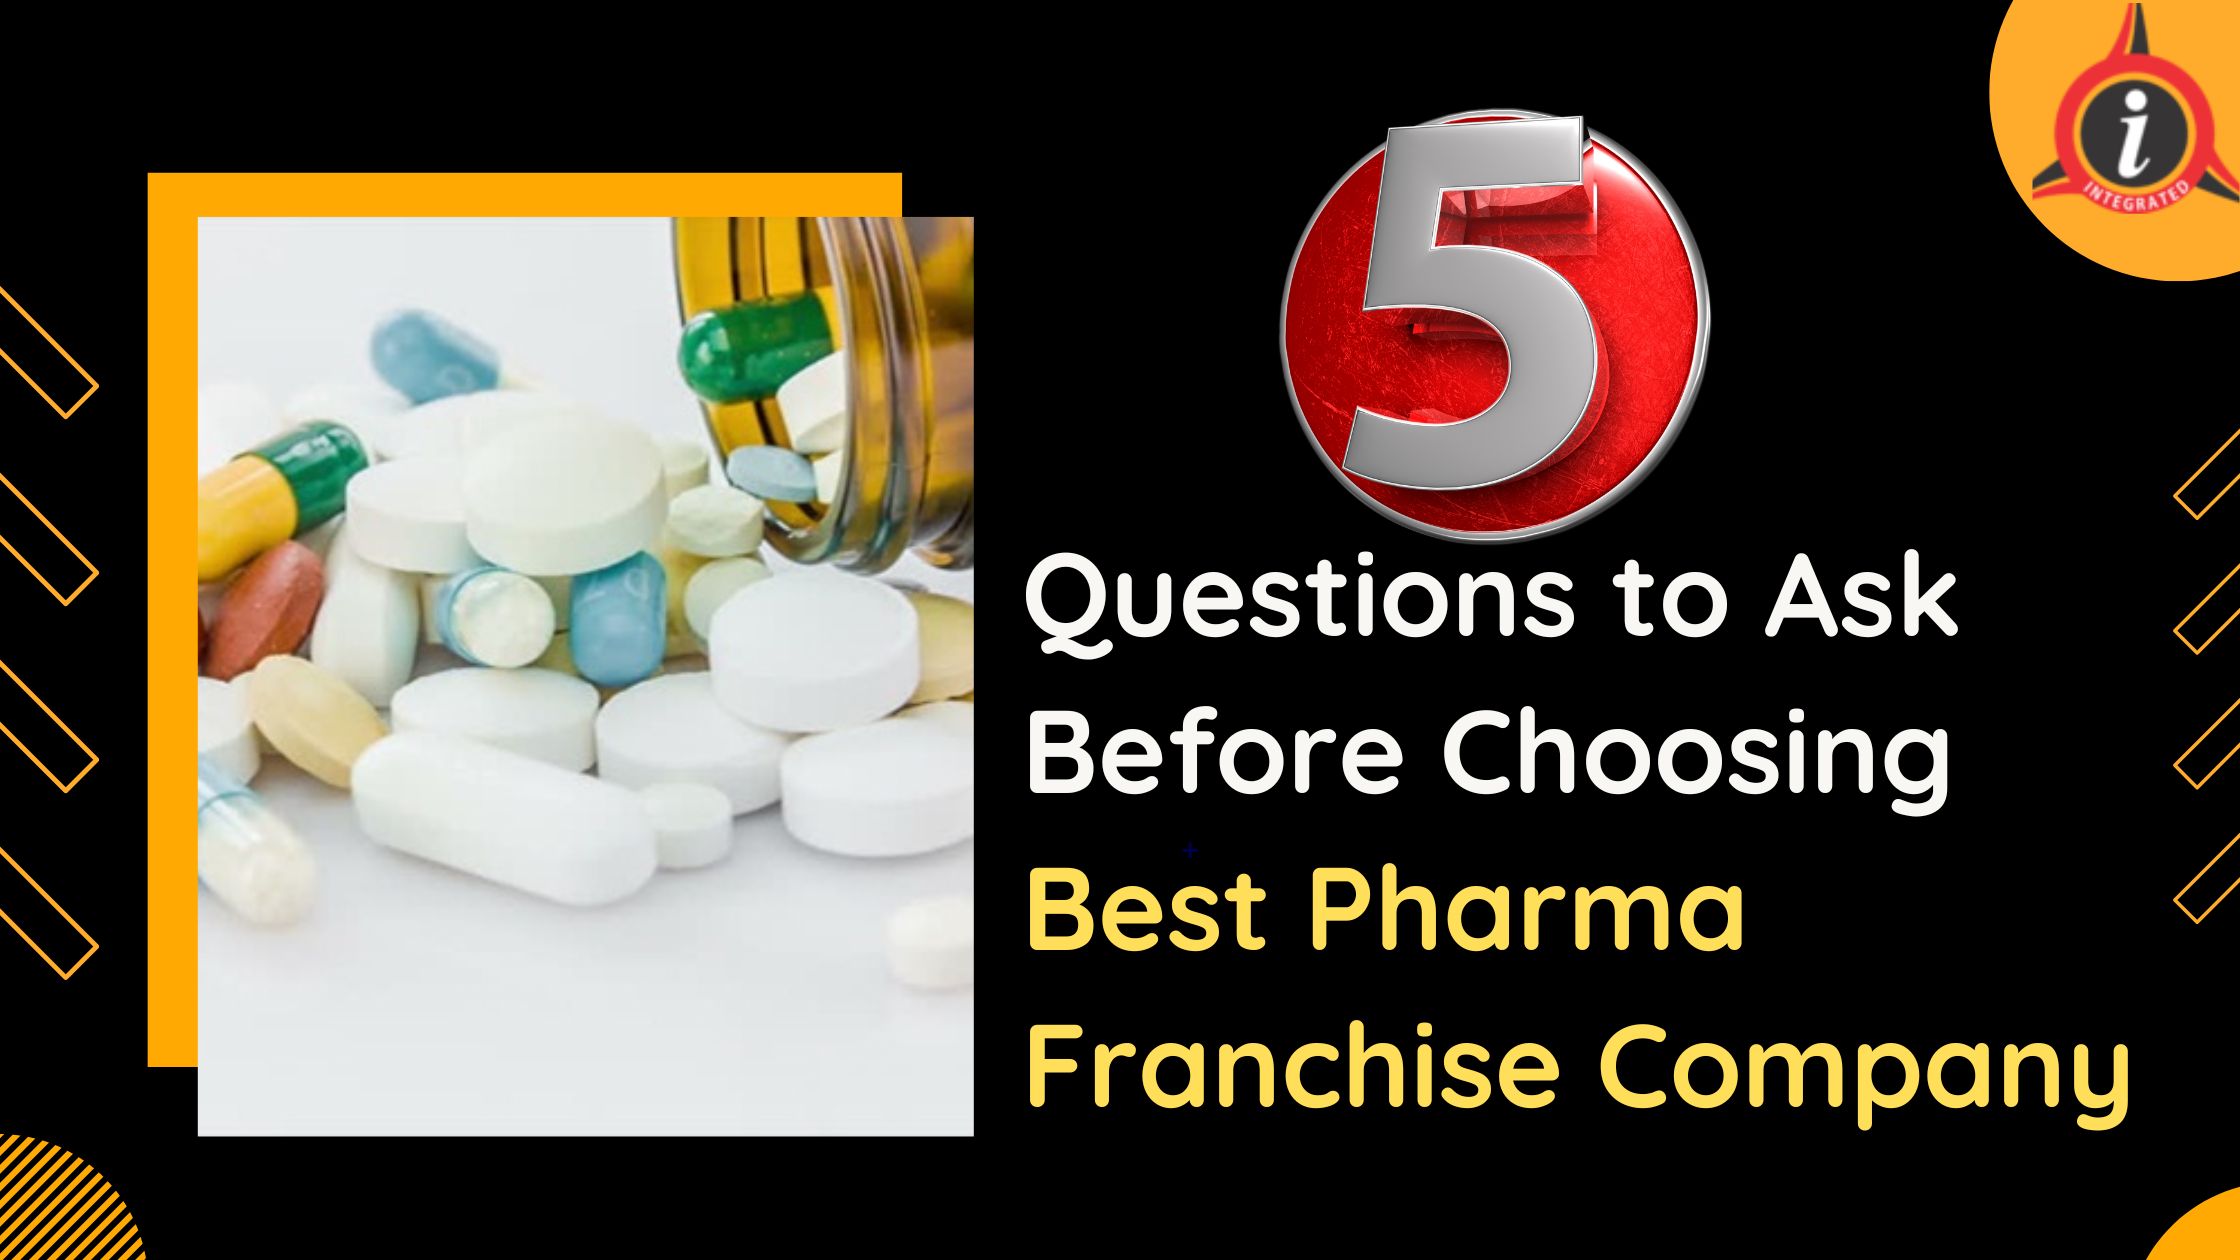 Choosing Best Pharma Franchise Company – 5 Questions to Consider